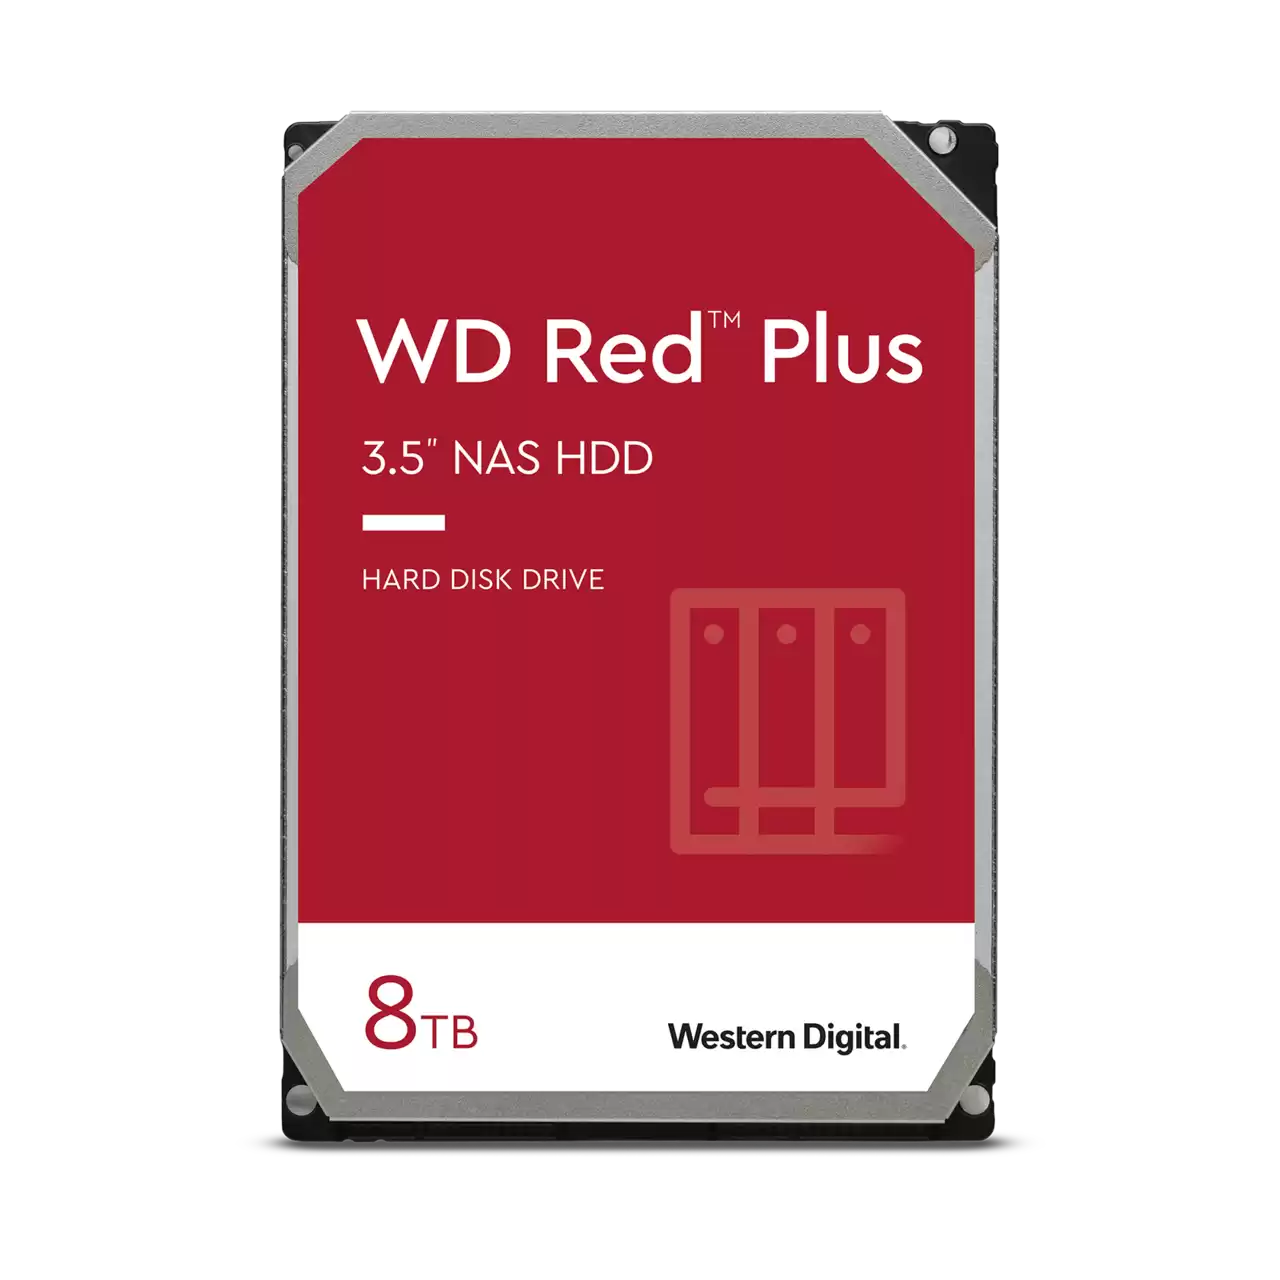 WD Red™ Plus CMR 8TB SATA 3.5 128 MB Cache HDD